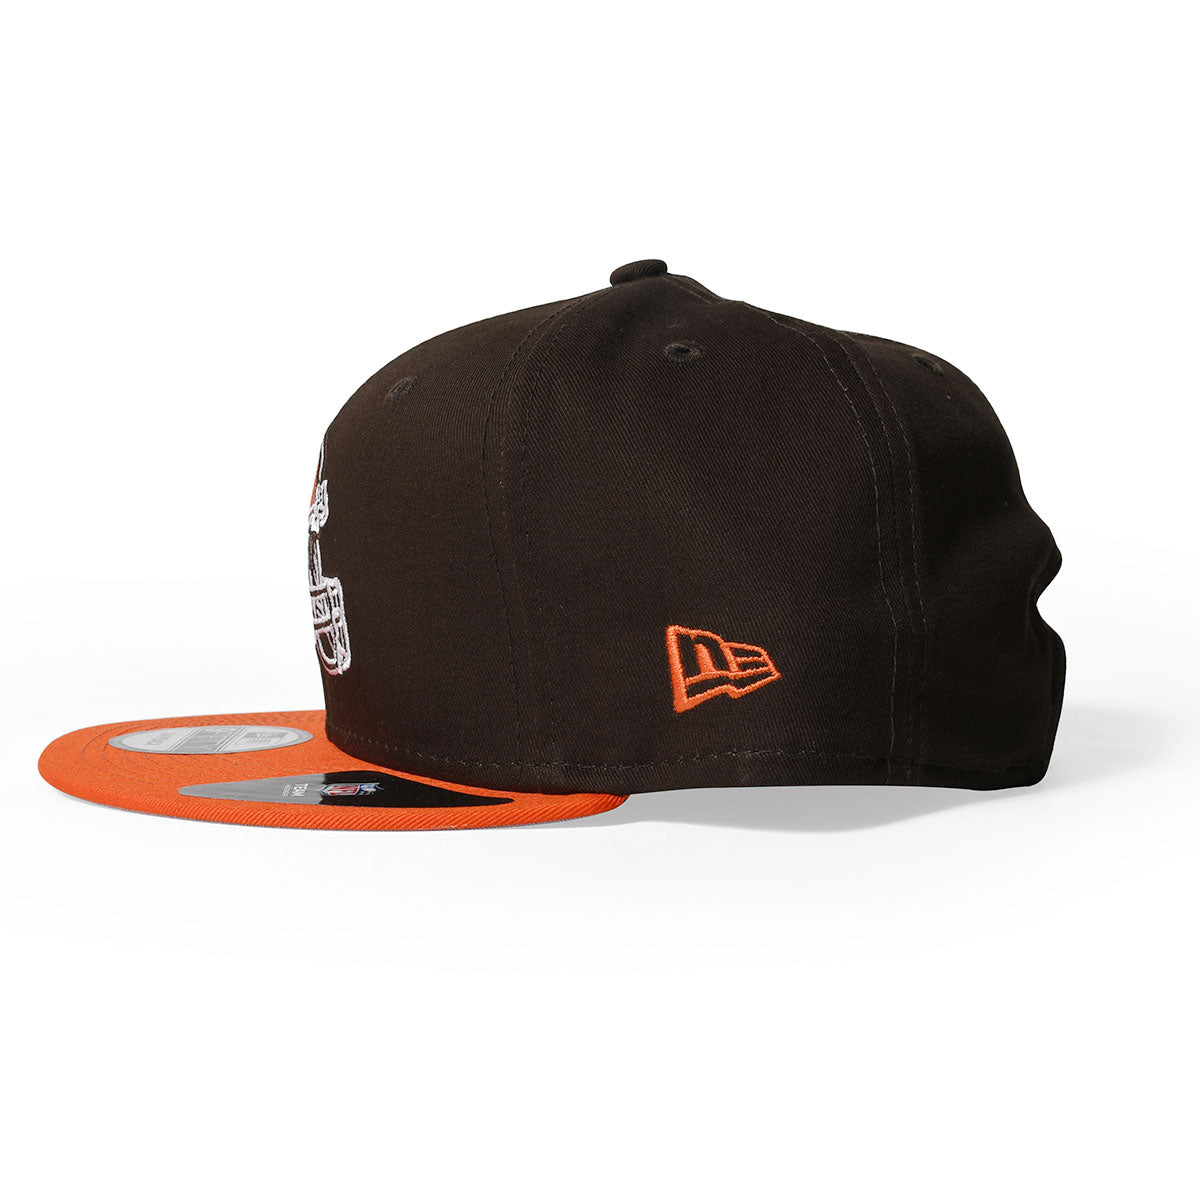 NEW ERA Cleveland Browns - 9FIFTY NFL BASIC SNAP CLEBRO 2TONE BRSSFO [11873017]